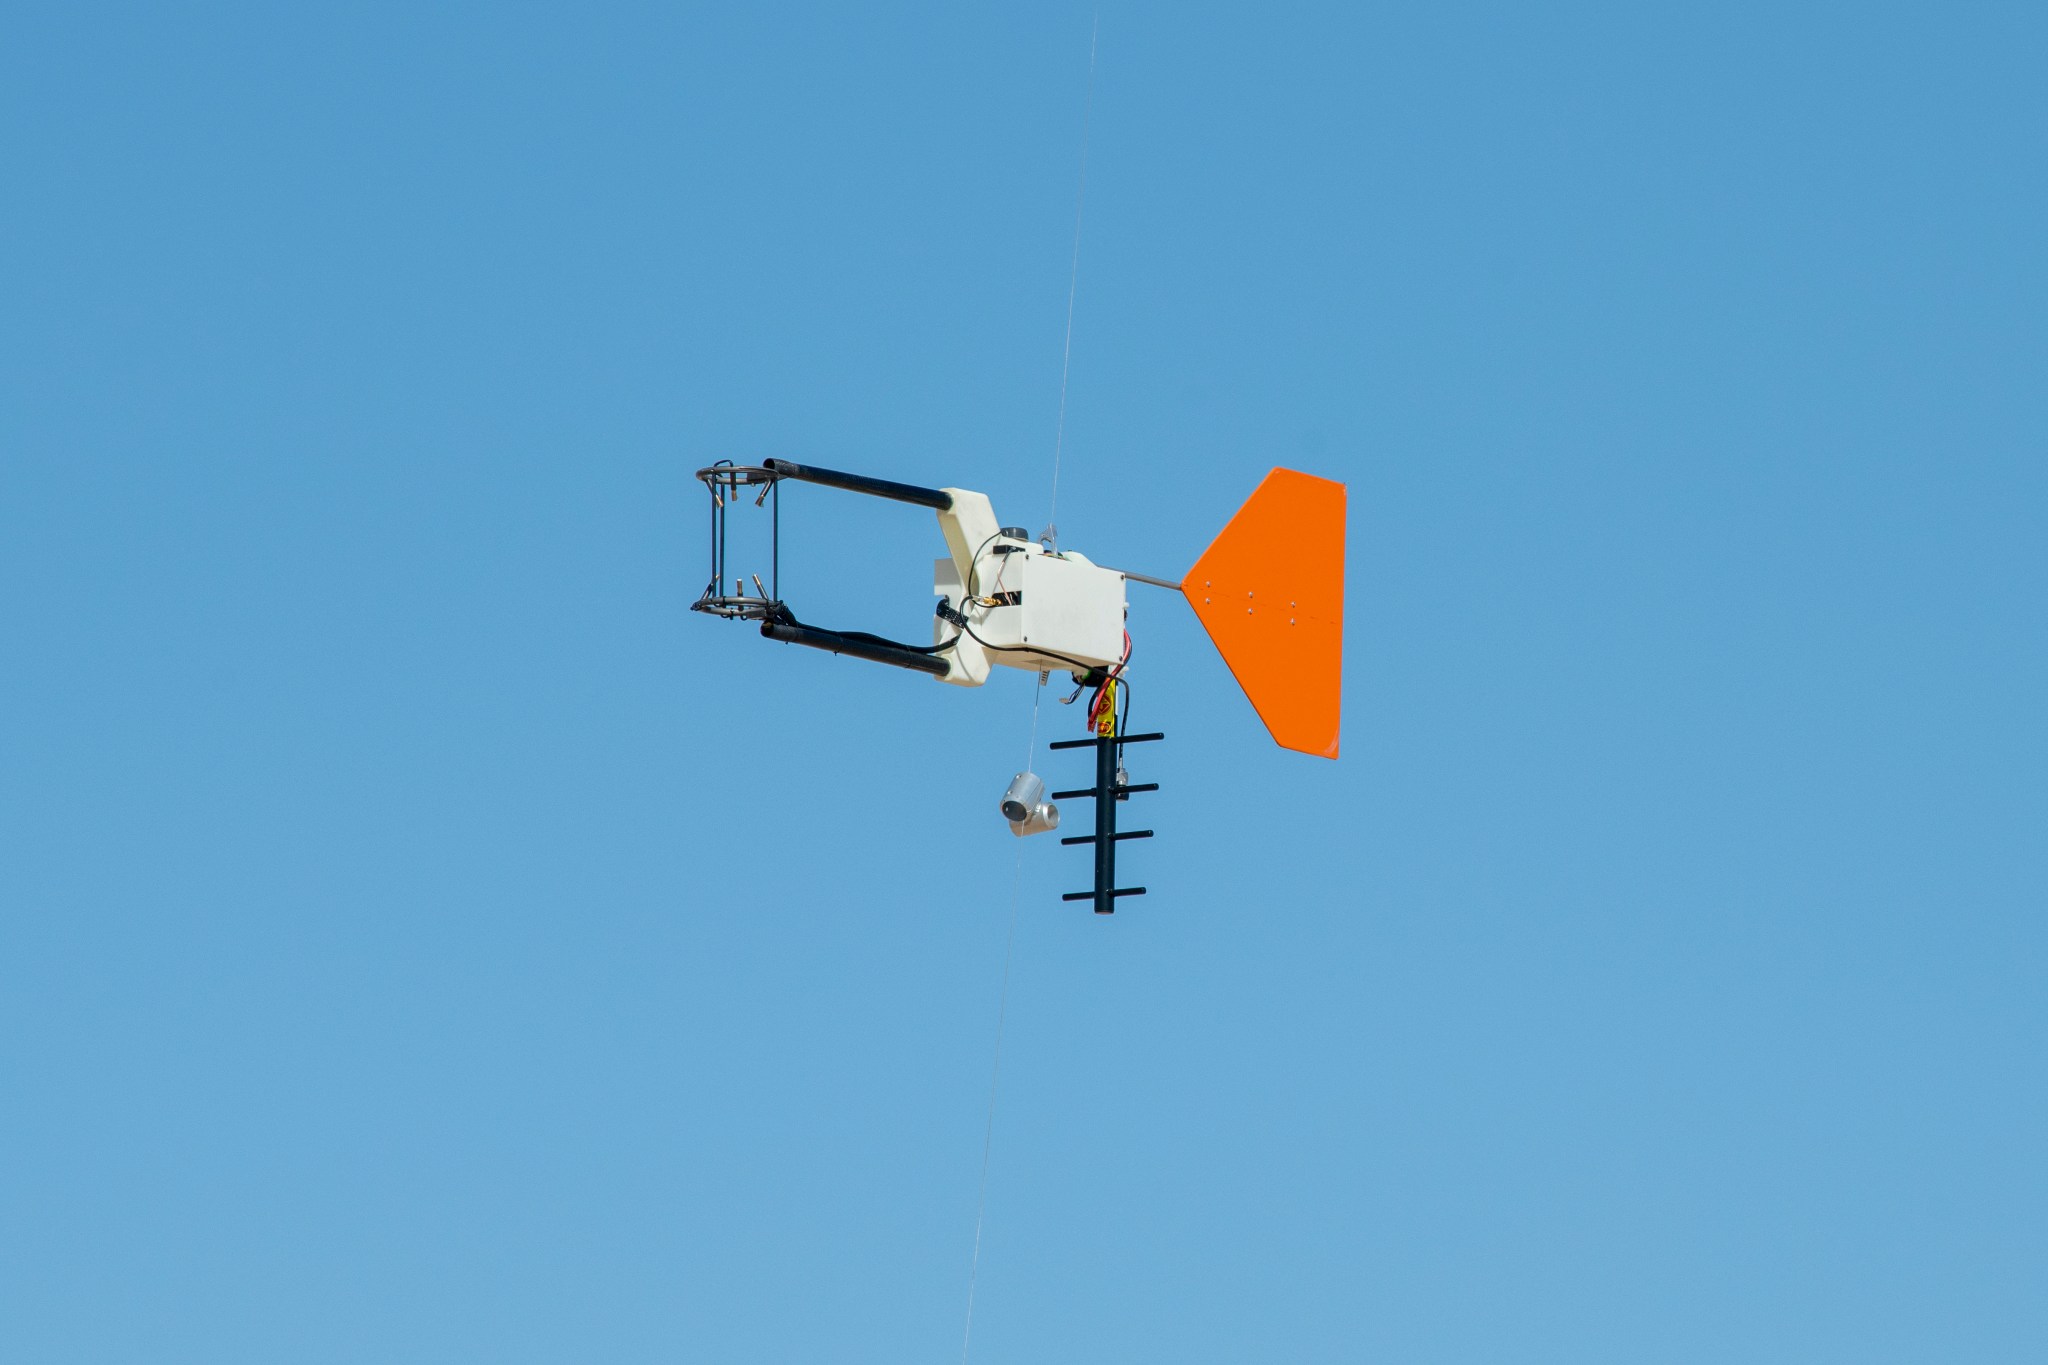 Weather instrumentation is shown in flight against a blue sky.